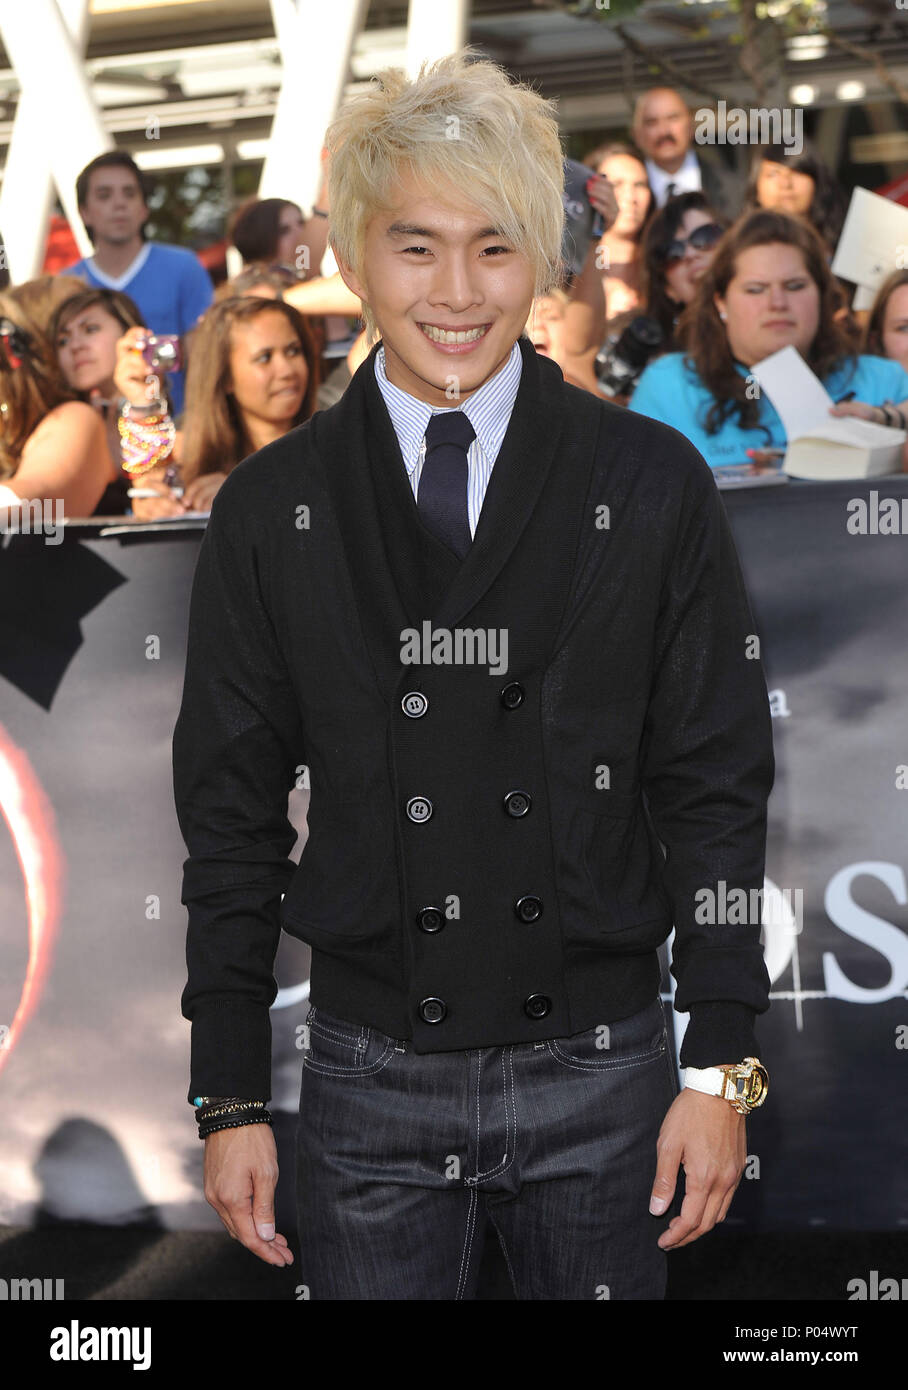 Justin Chon  25   - The Twilight Saga- Eclipse Premiere at the Nokia Theatre In Los Angeles.Justin Chon  25 Red Carpet Event, Vertical, USA, Film Industry, Celebrities,  Photography, Bestof, Arts Culture and Entertainment, Topix Celebrities fashion /  Vertical, Best of, Event in Hollywood Life - California,  Red Carpet and backstage, USA, Film Industry, Celebrities,  movie celebrities, TV celebrities, Music celebrities, Photography, Bestof, Arts Culture and Entertainment,  Topix, vertical, one person,, from the year , 2010, inquiry tsuni@Gamma-USA.com - Three Quarters Stock Photo